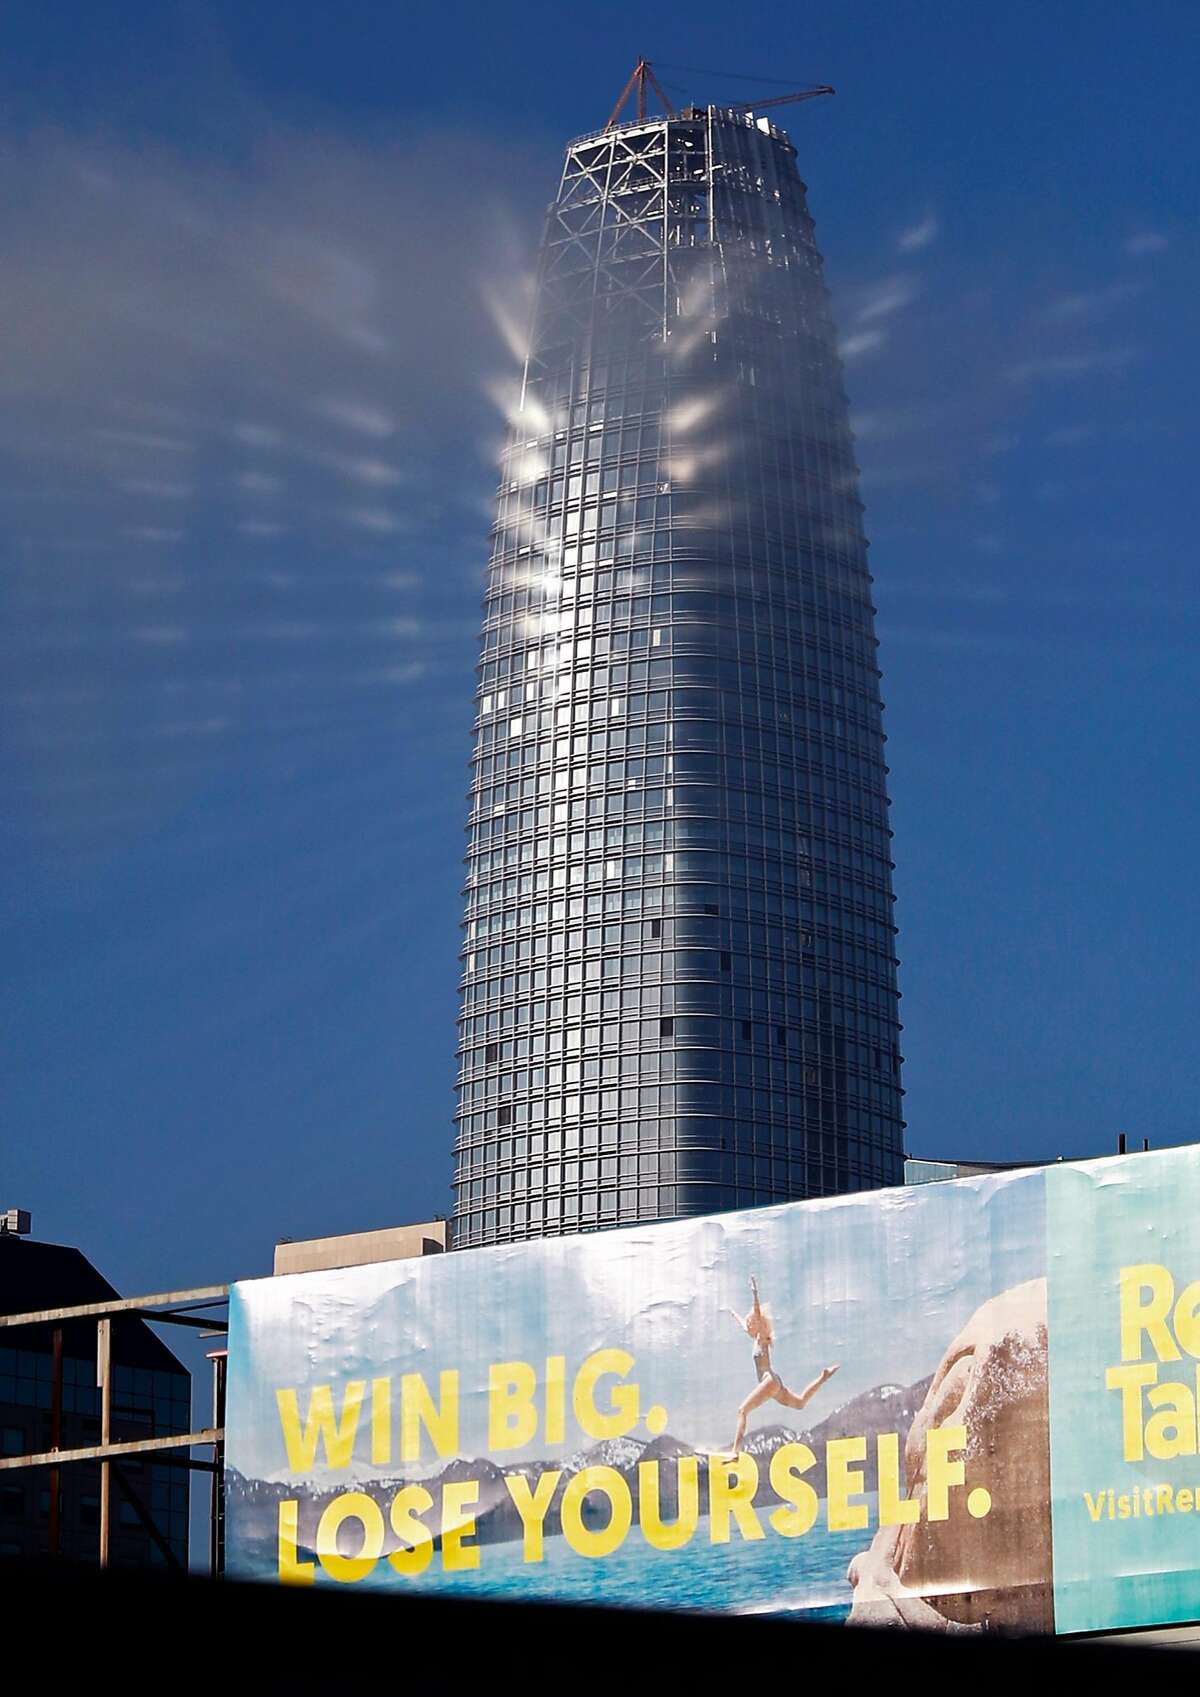 Salesforce Tower in San Francisco, Calif. on Monday, August 28, 2017.